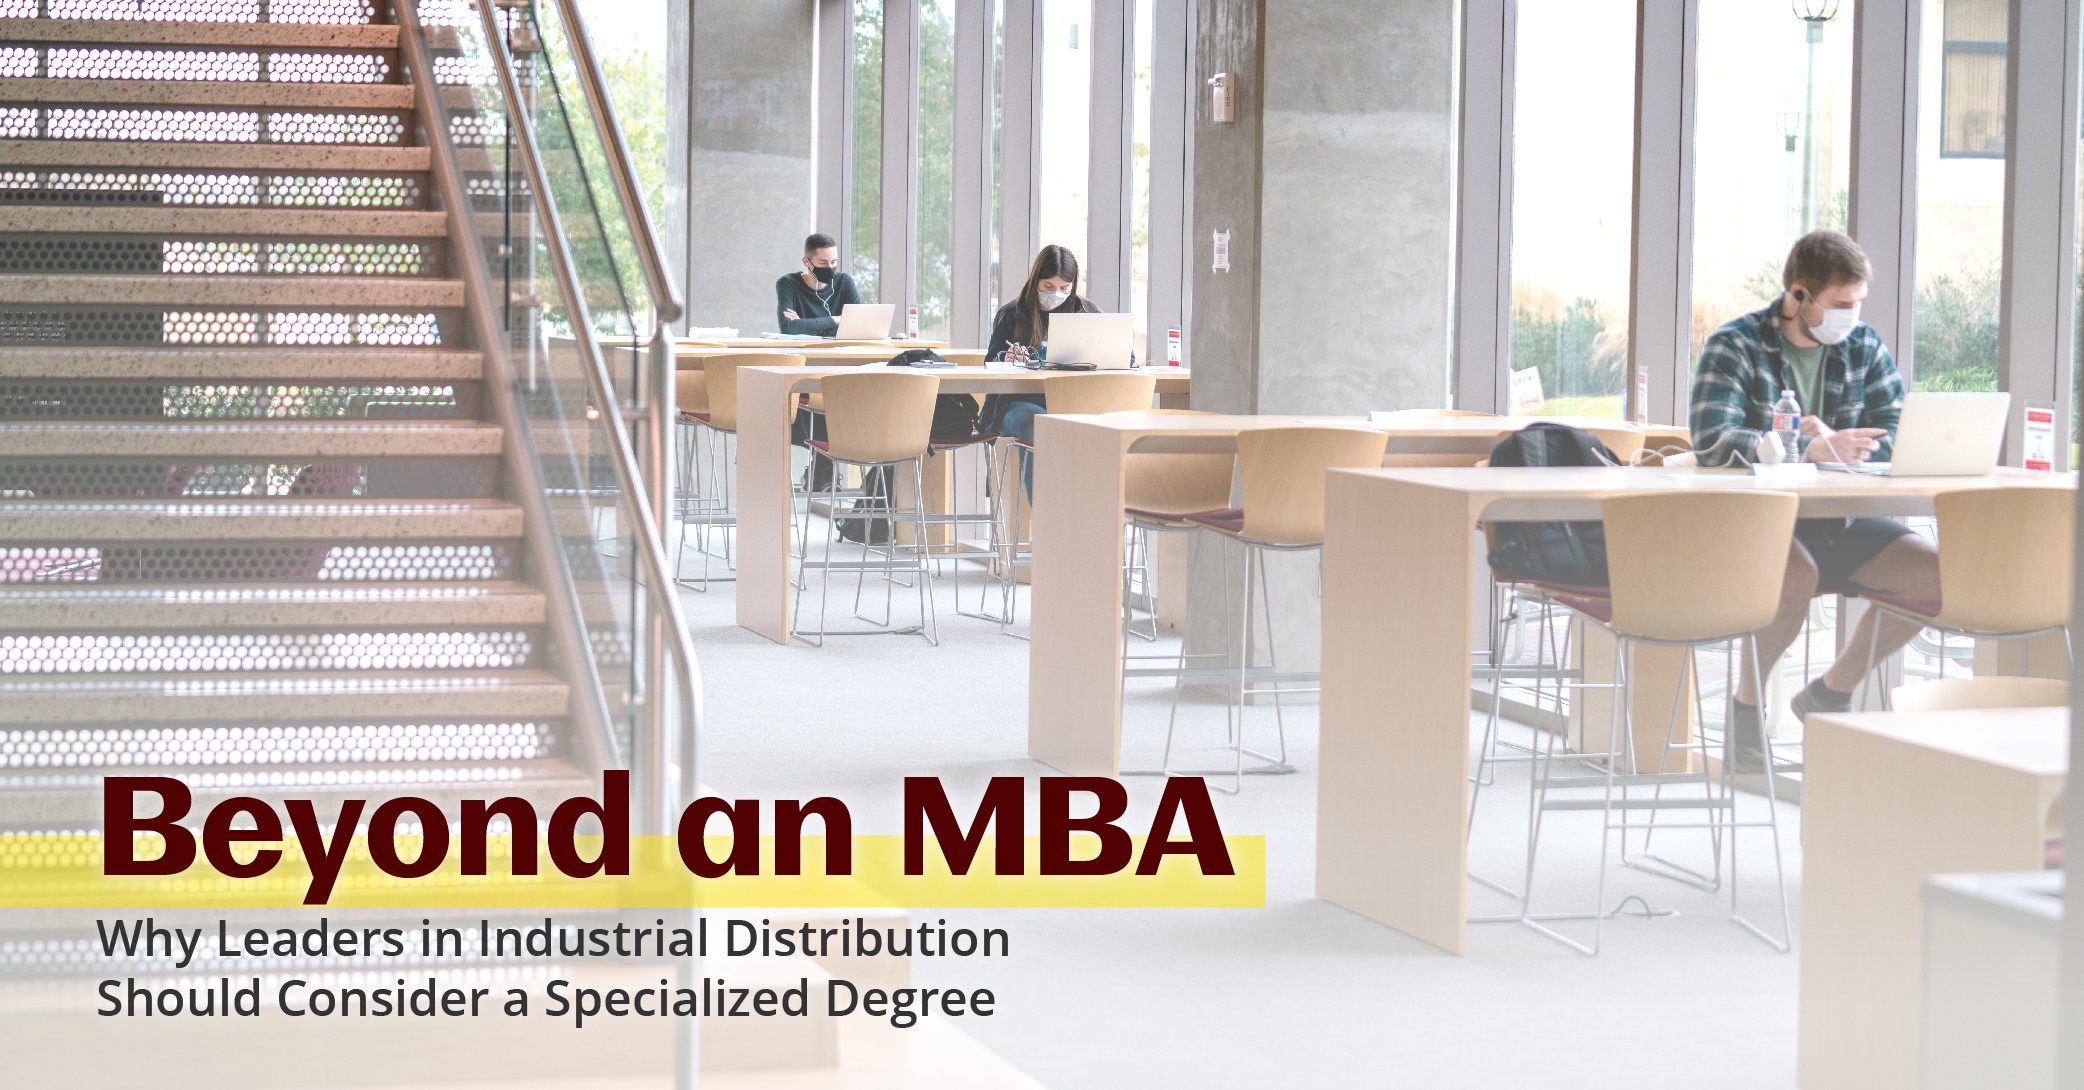 Beyond an MBA - Why Leaders in Industrial Distribution Should Consider a Specialized Degree